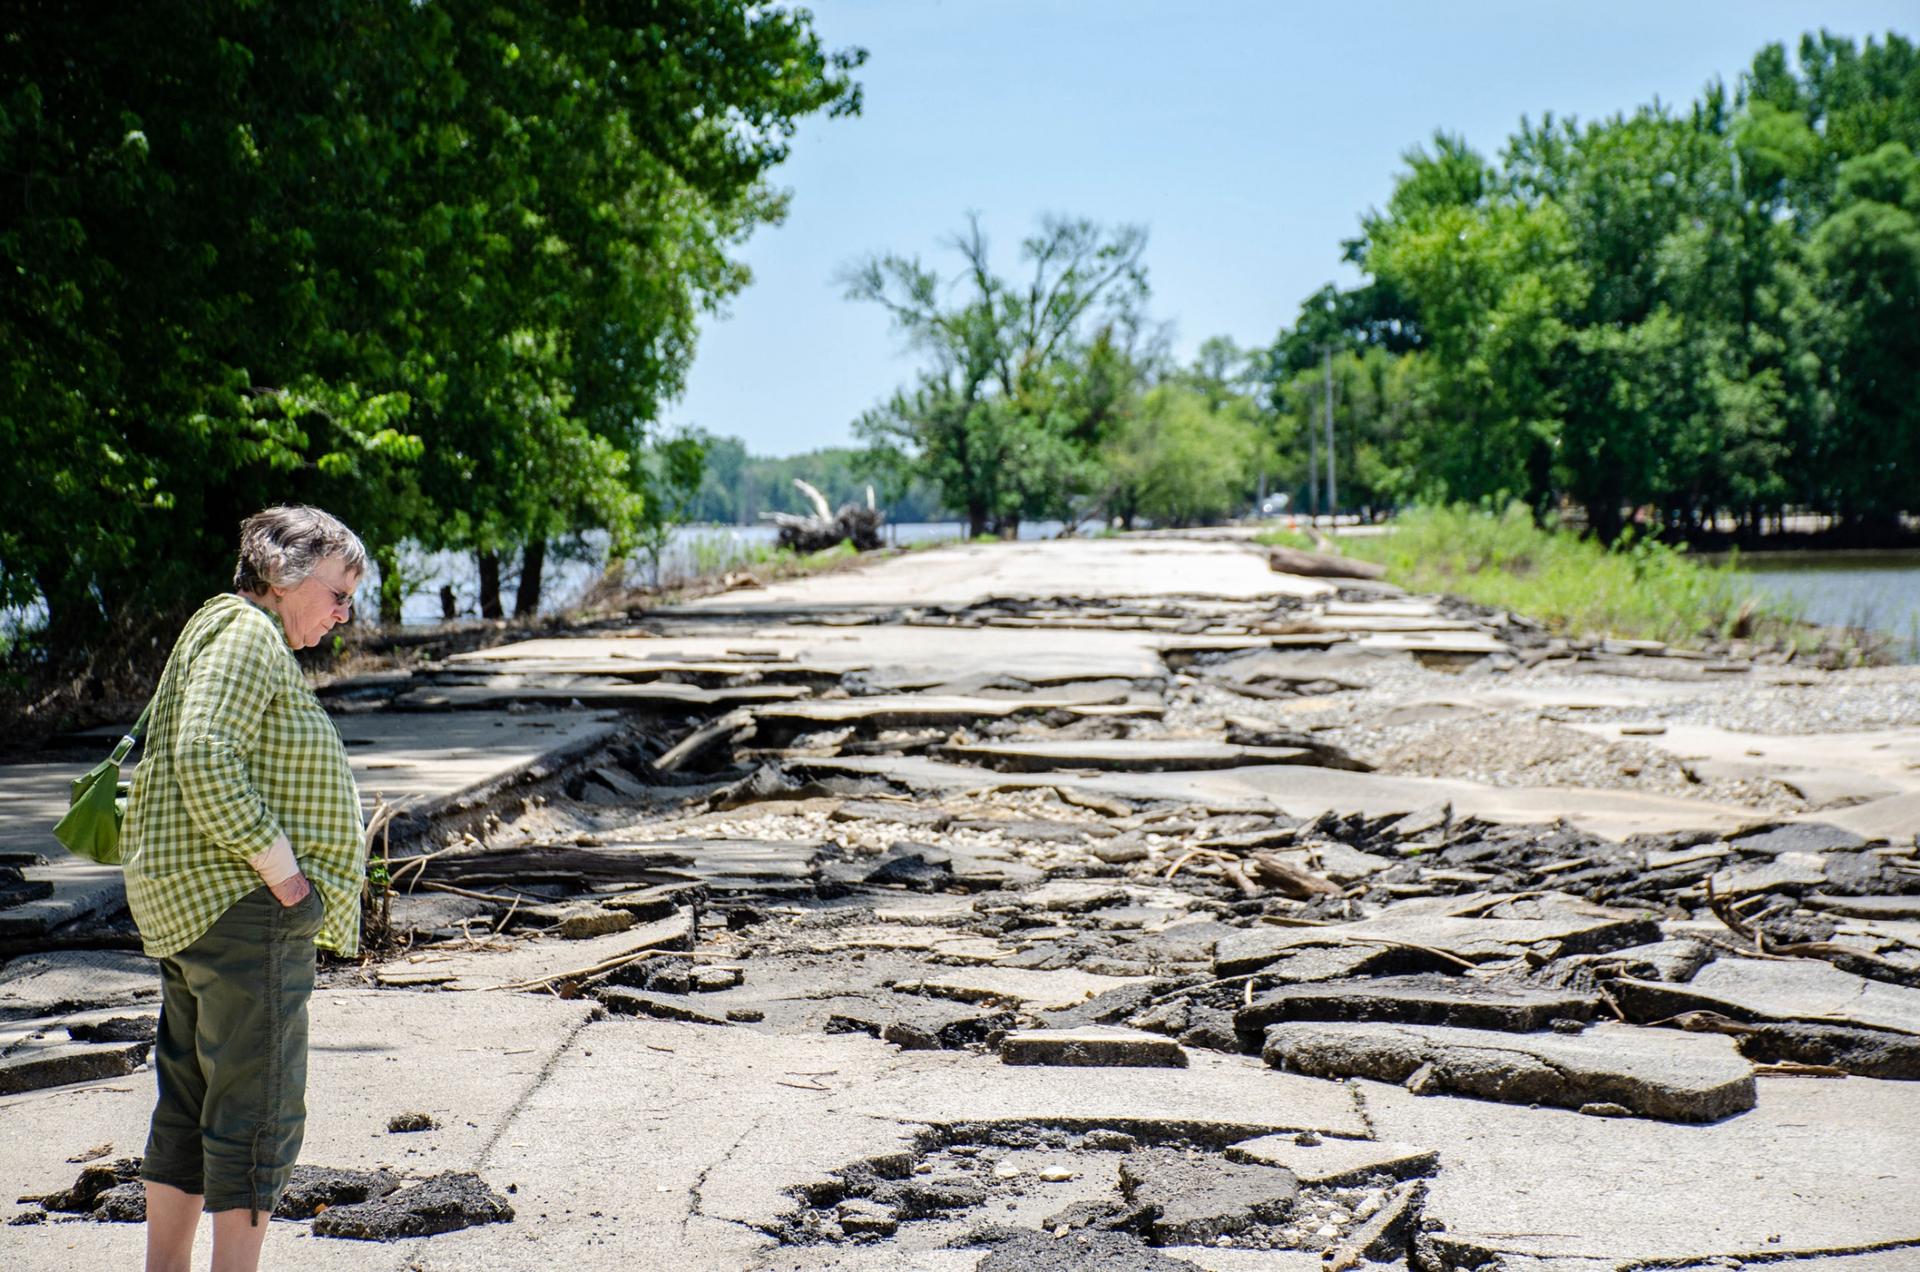 A woman is shown standing on a road that is broken up in many pieces.